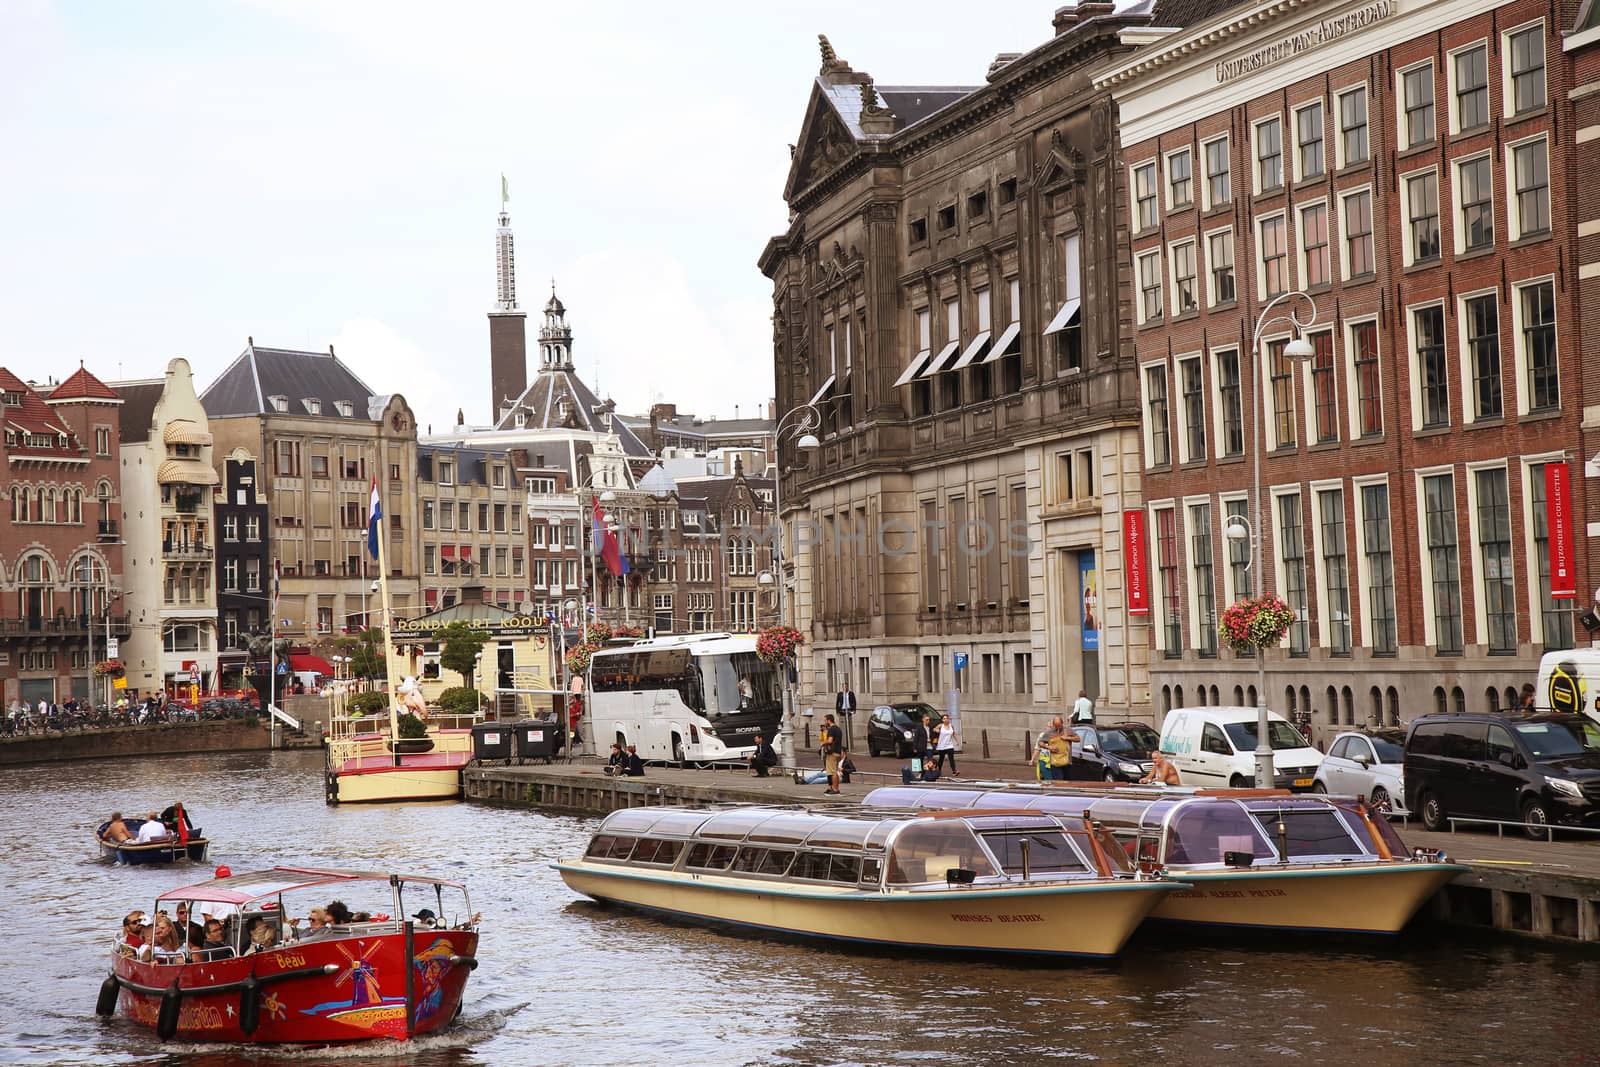 AMSTERDAM, THE NETHERLANDS - AUGUST 19, 2015: View on Rokin from bridge Doelensluis. Street life, Canal, tourists, bicycle and boat in Amsterdam. Amsterdam is capital of the Netherlands on August 19, 2015.